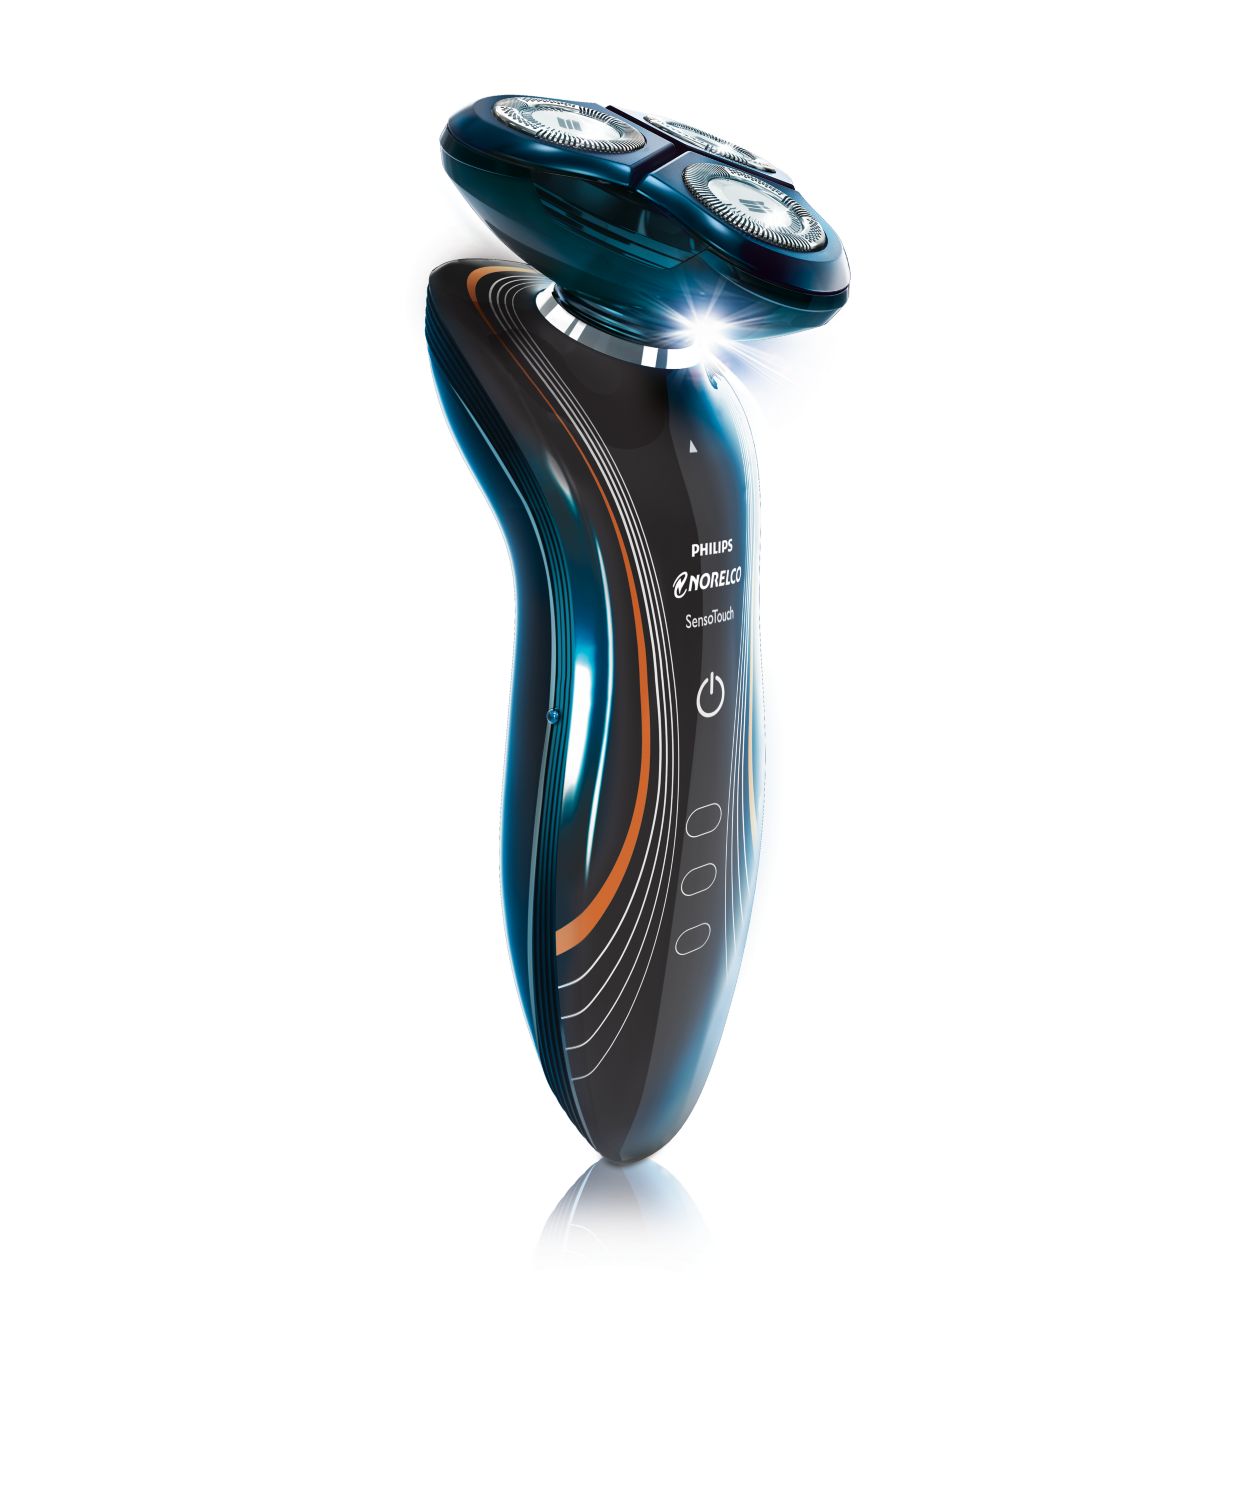 Philips Norelco 9300 and 9700 Electric Shaver Review - Moo Review